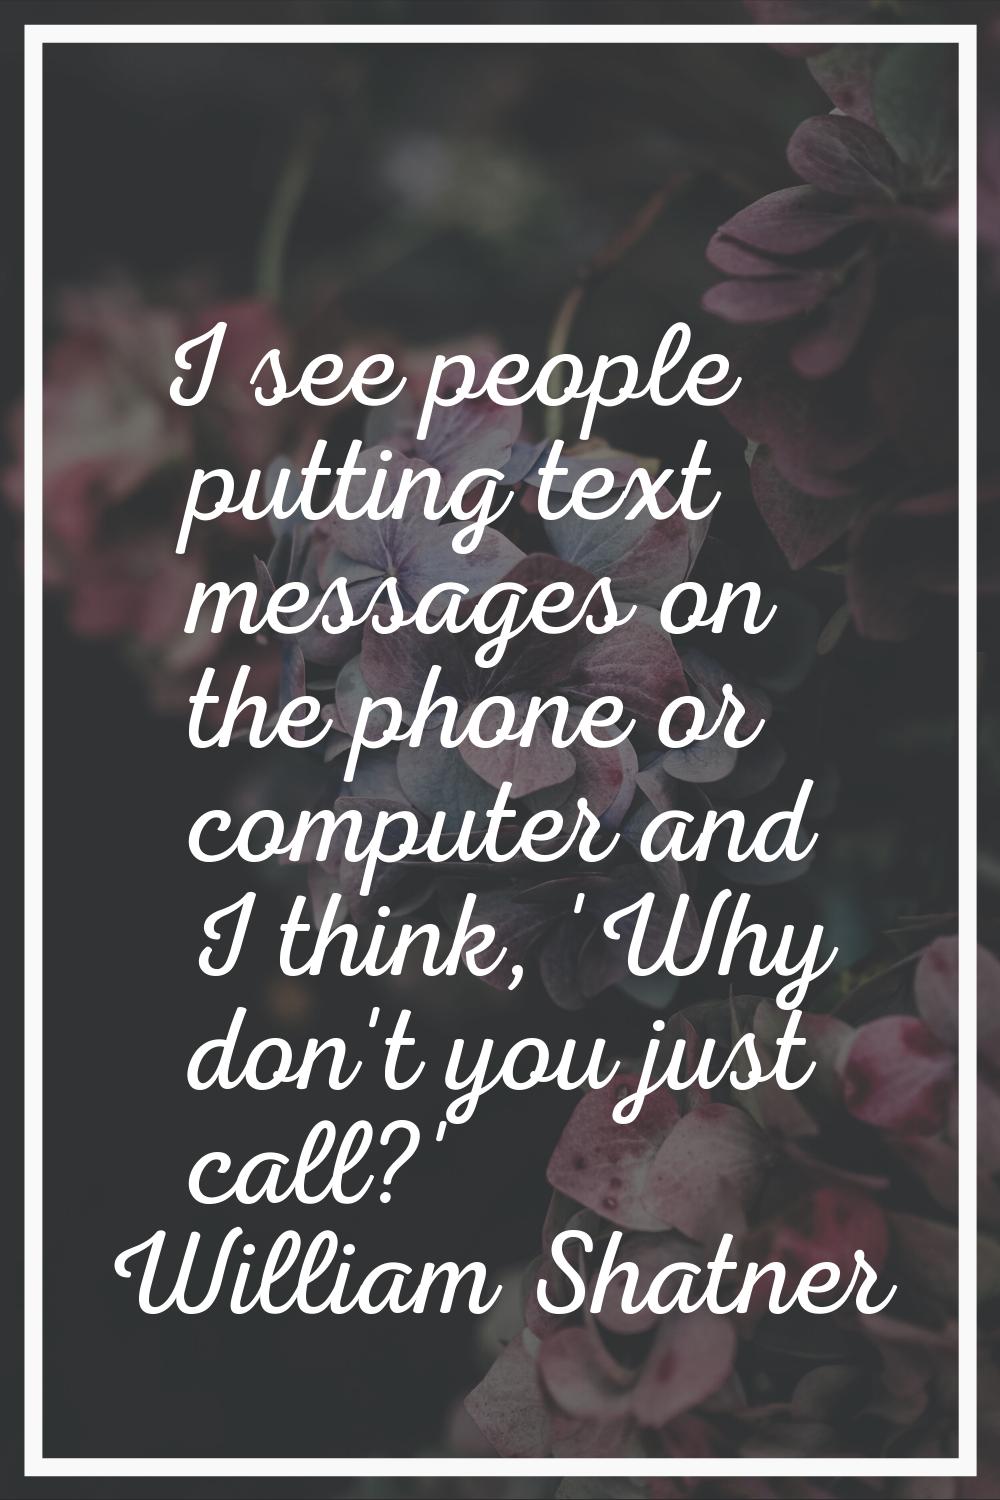 I see people putting text messages on the phone or computer and I think, 'Why don't you just call?'